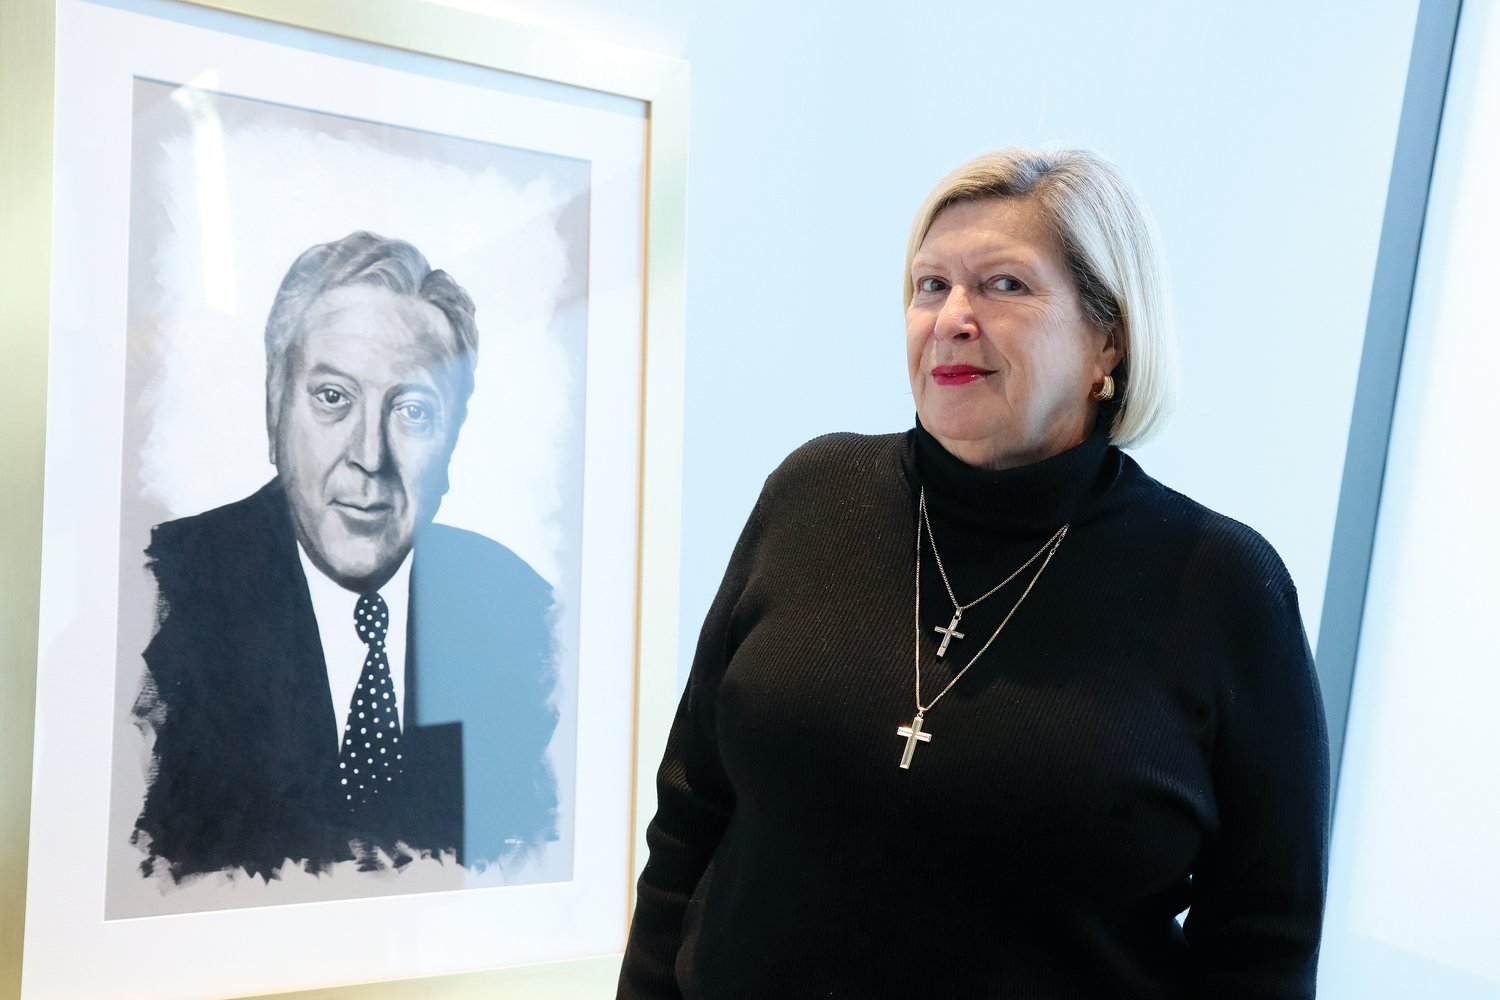 At the Papitto Opportunity Connection office in downtown Providence, Barbara Papitto smiles beside a portrait of her late husband Ralph Papitto.